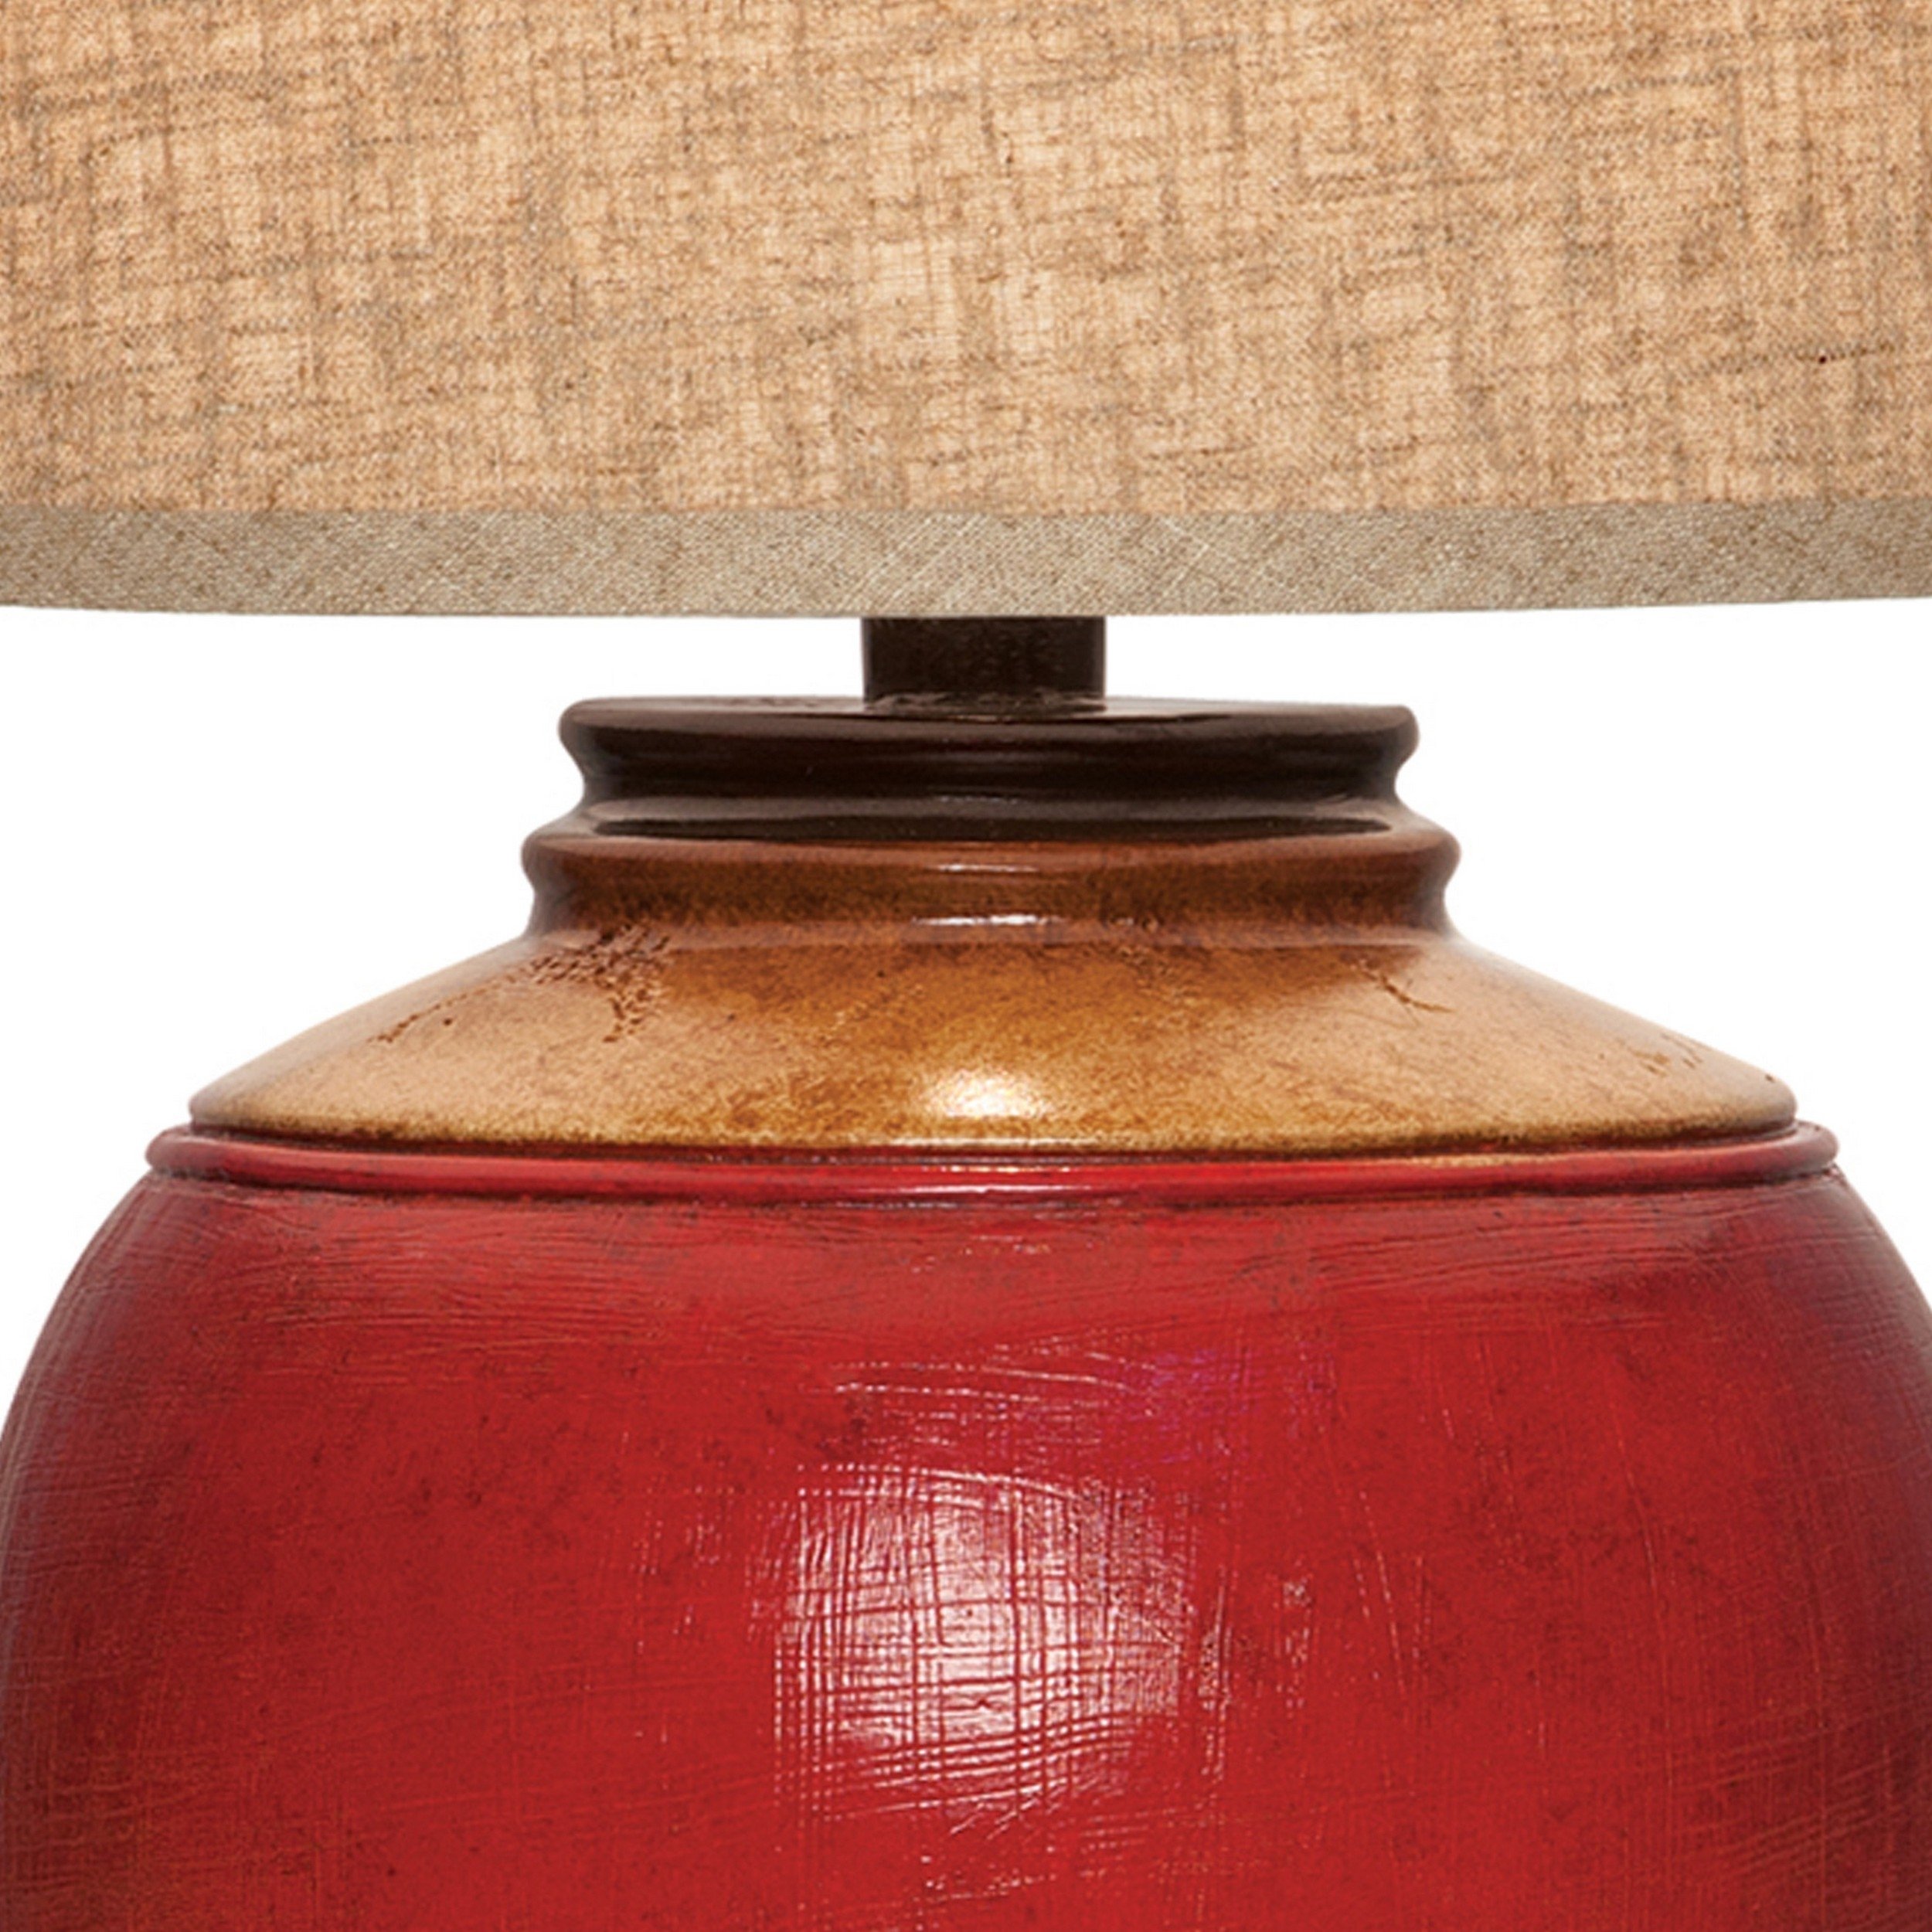 Ruhi 31 Inch Table Lamp, Curved Pot, Multicolor Red And Orange, Drum Shade- Saltoro Sherpi